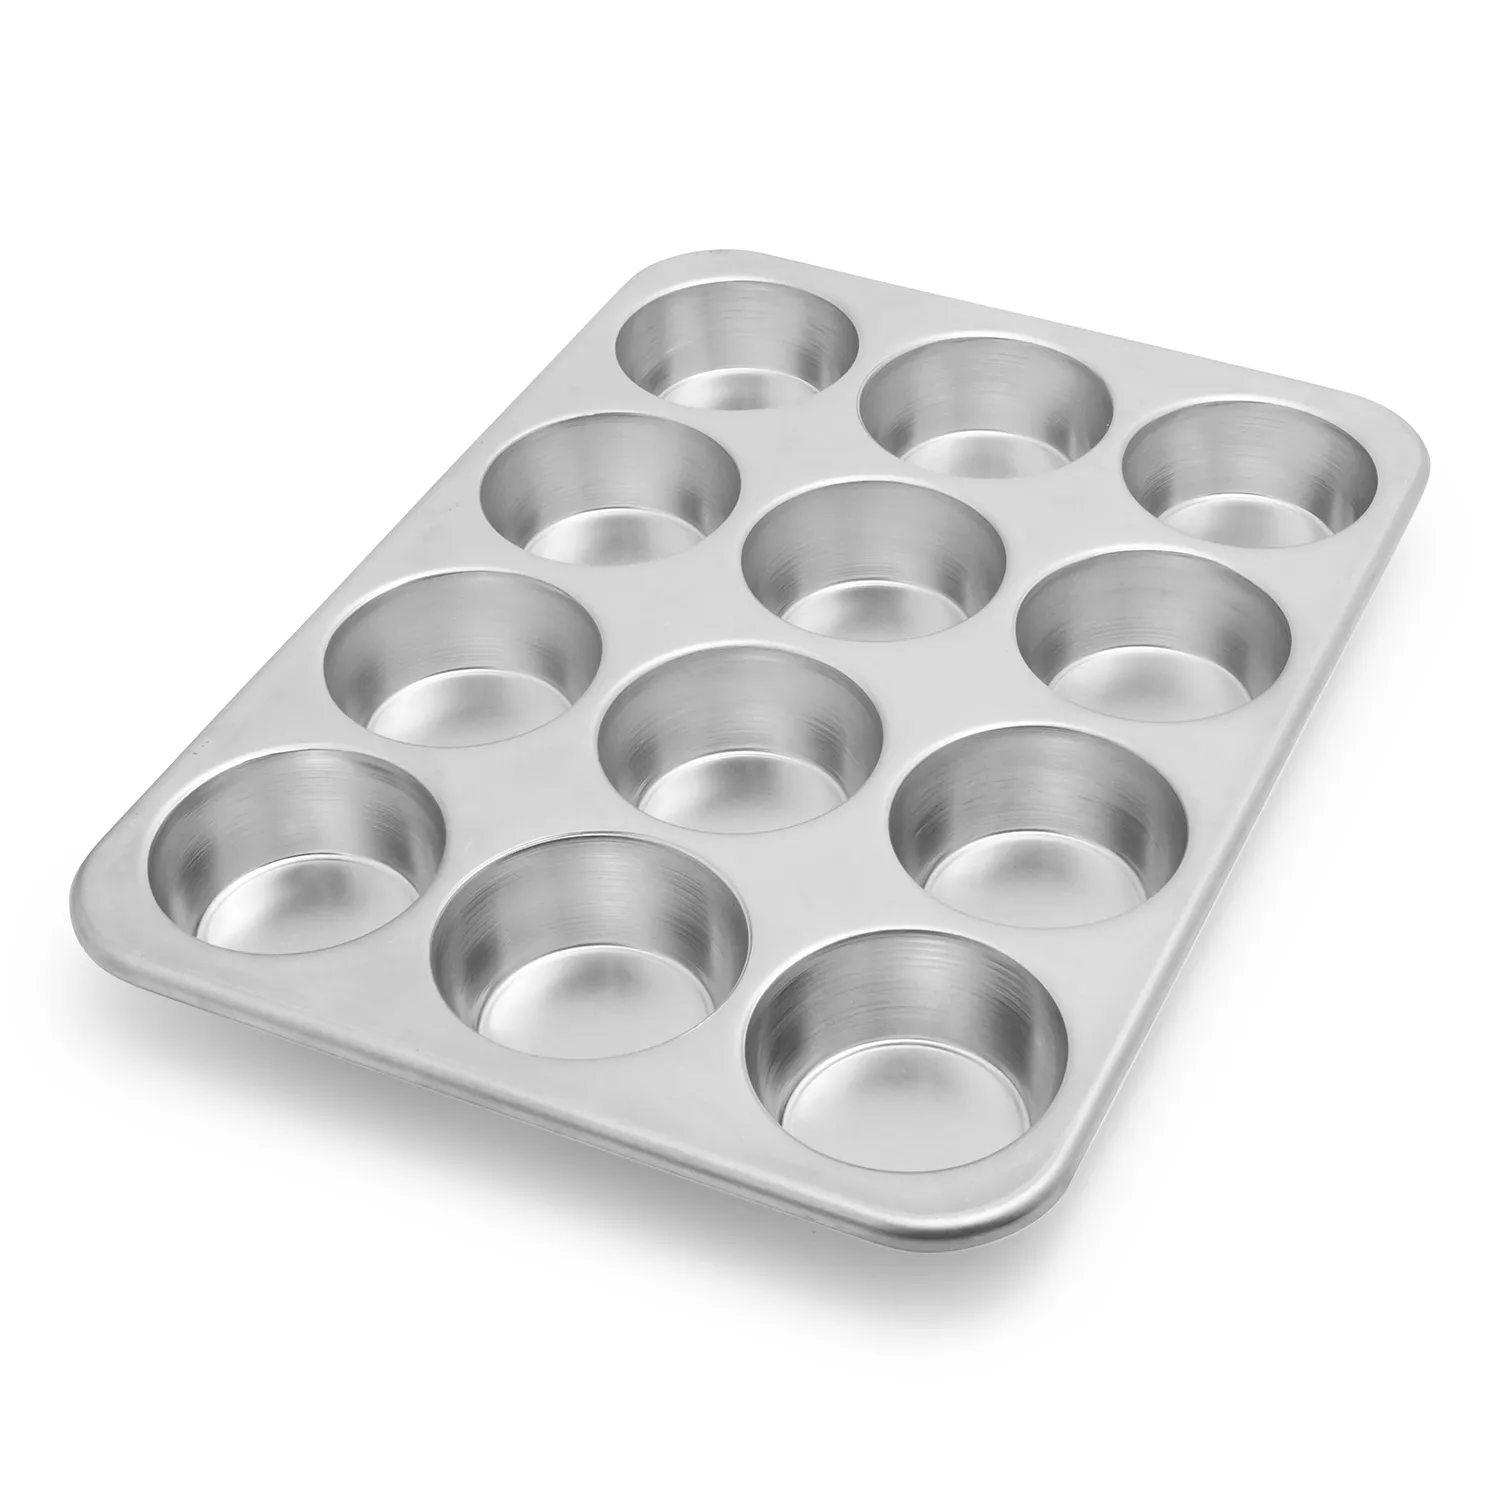 NORDIC WARE 12 CUP MUFFIN PAN WITH LID